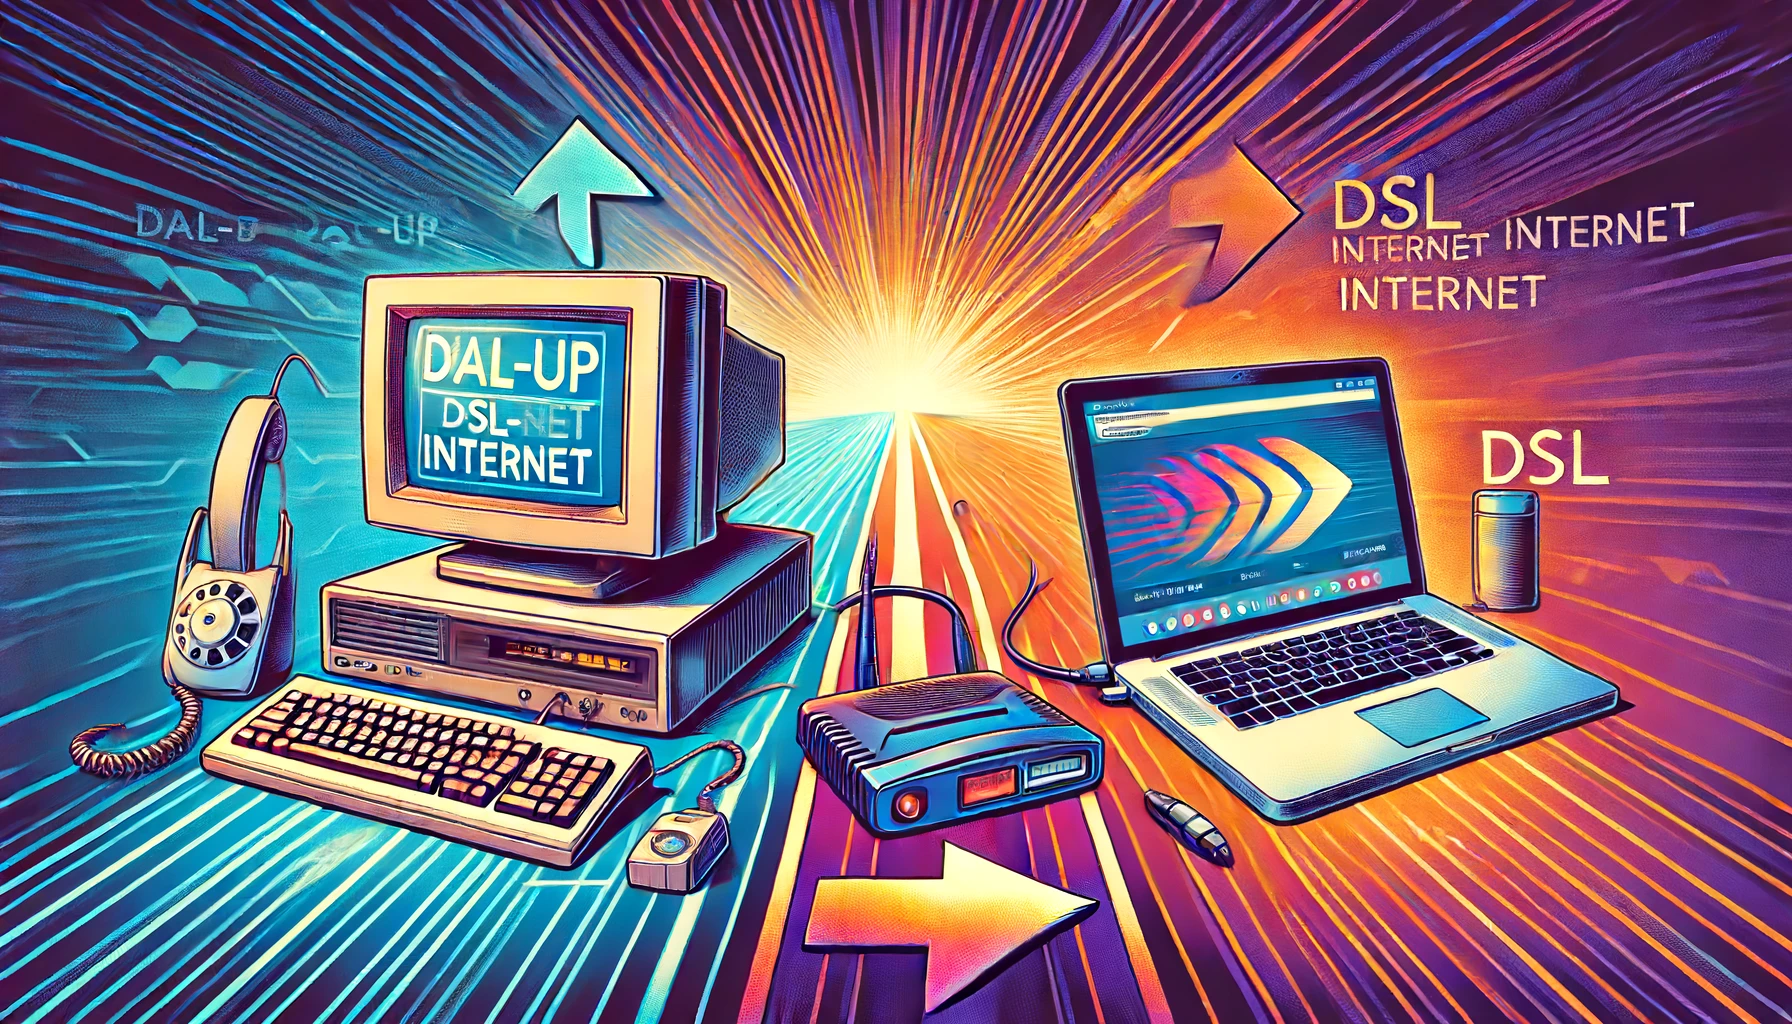 Upgrading from Dial-Up to DSL: What You Need to Know